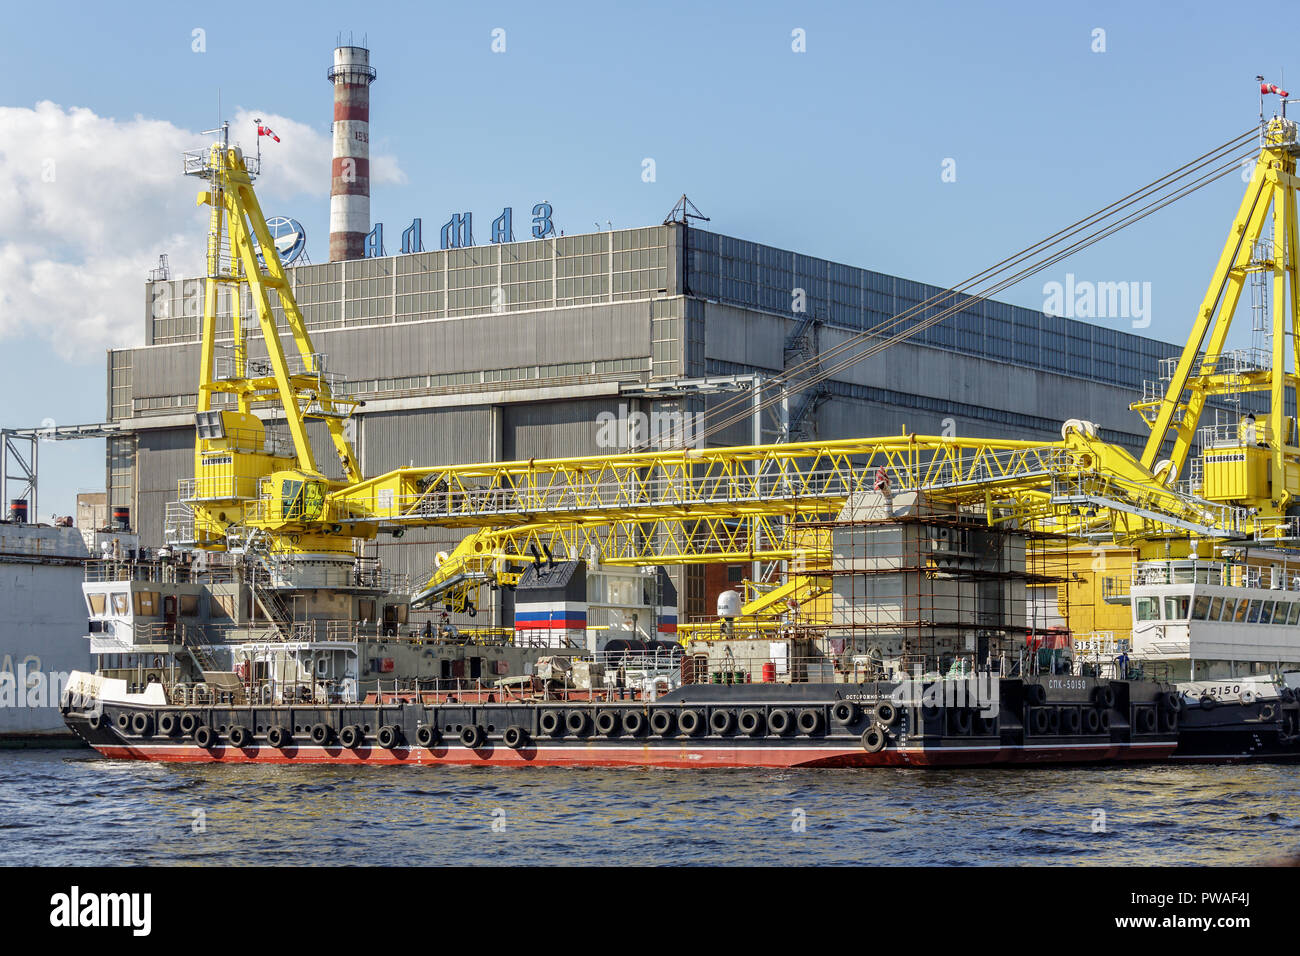 SAINT PETERSBURG, RUSSIA - MAY 23, 2016: Dock of ALMAZ Shipbuilding Company, St.-Petersburg. Company specializes in high-speed ships and boats buildin Stock Photo